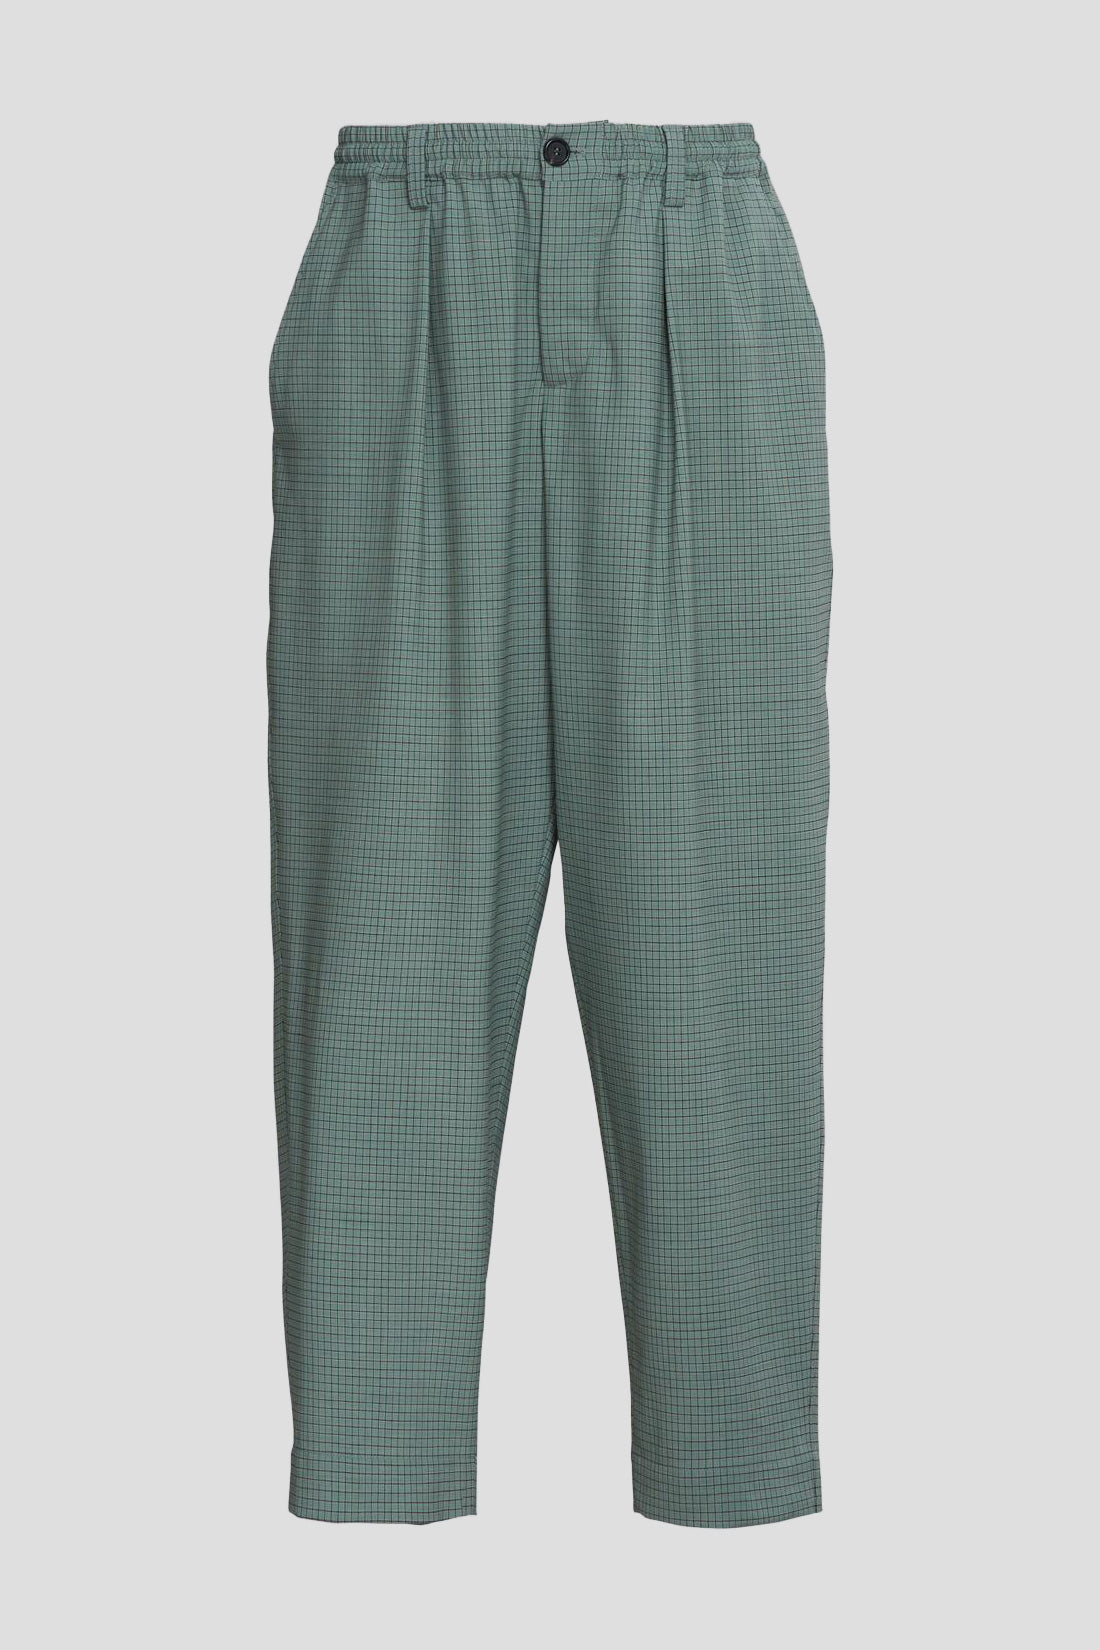 Mint Check Easy Pant